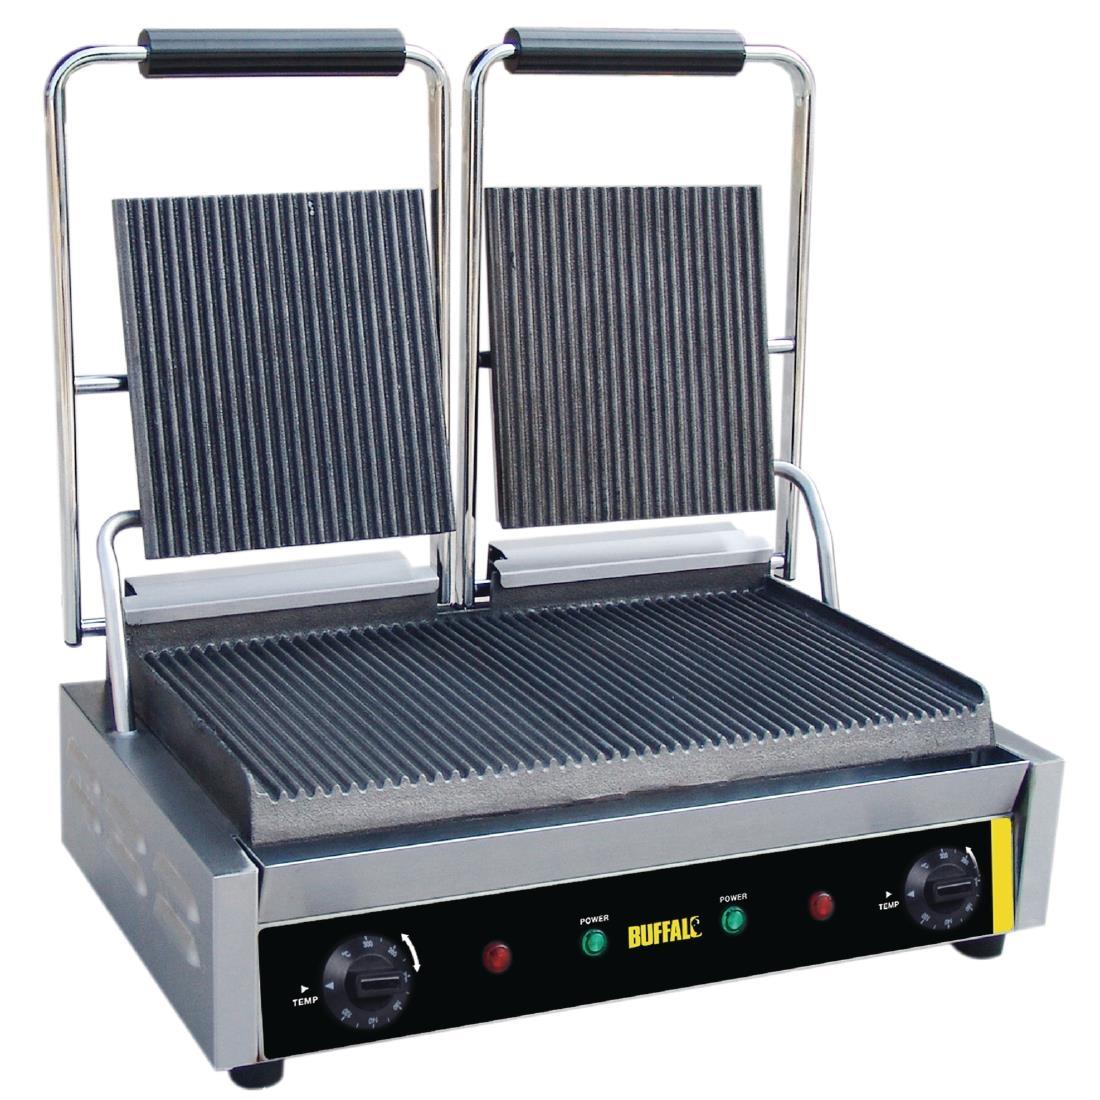 Buffalo Bistro Contact Grill Double Ribbed - DM902 - 1